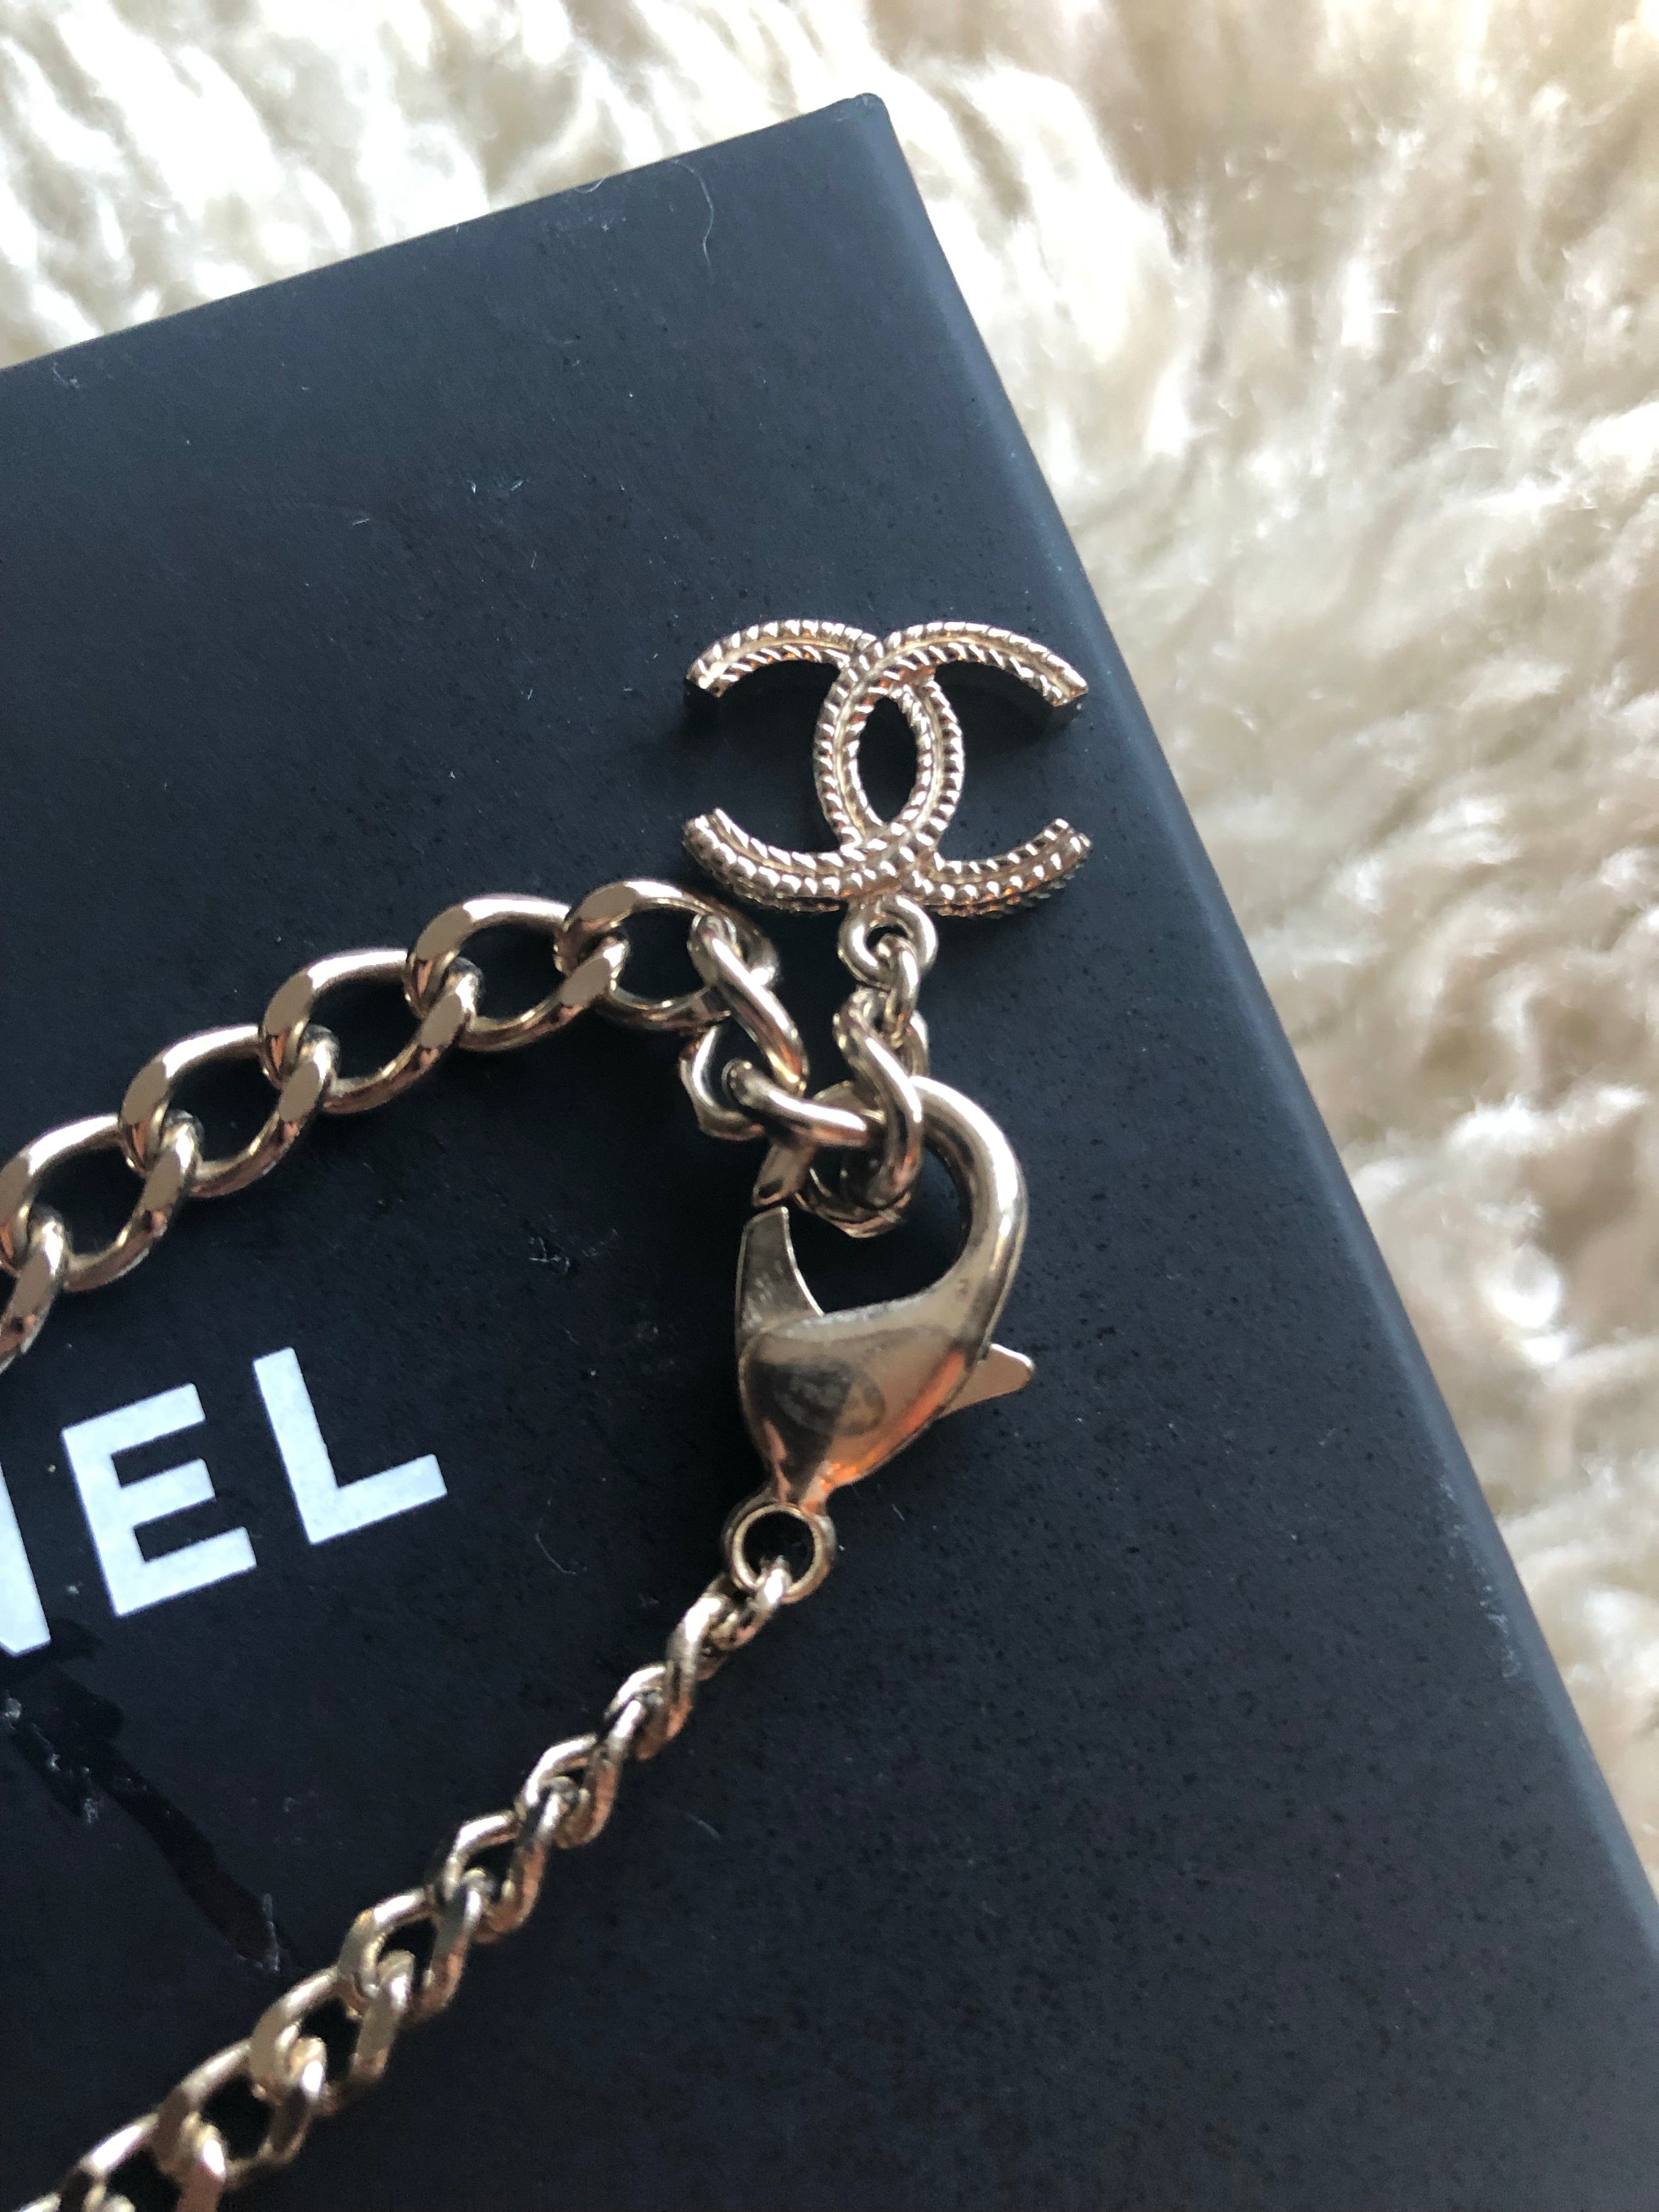 Chanel Chanel Heart necklace - AWC1102